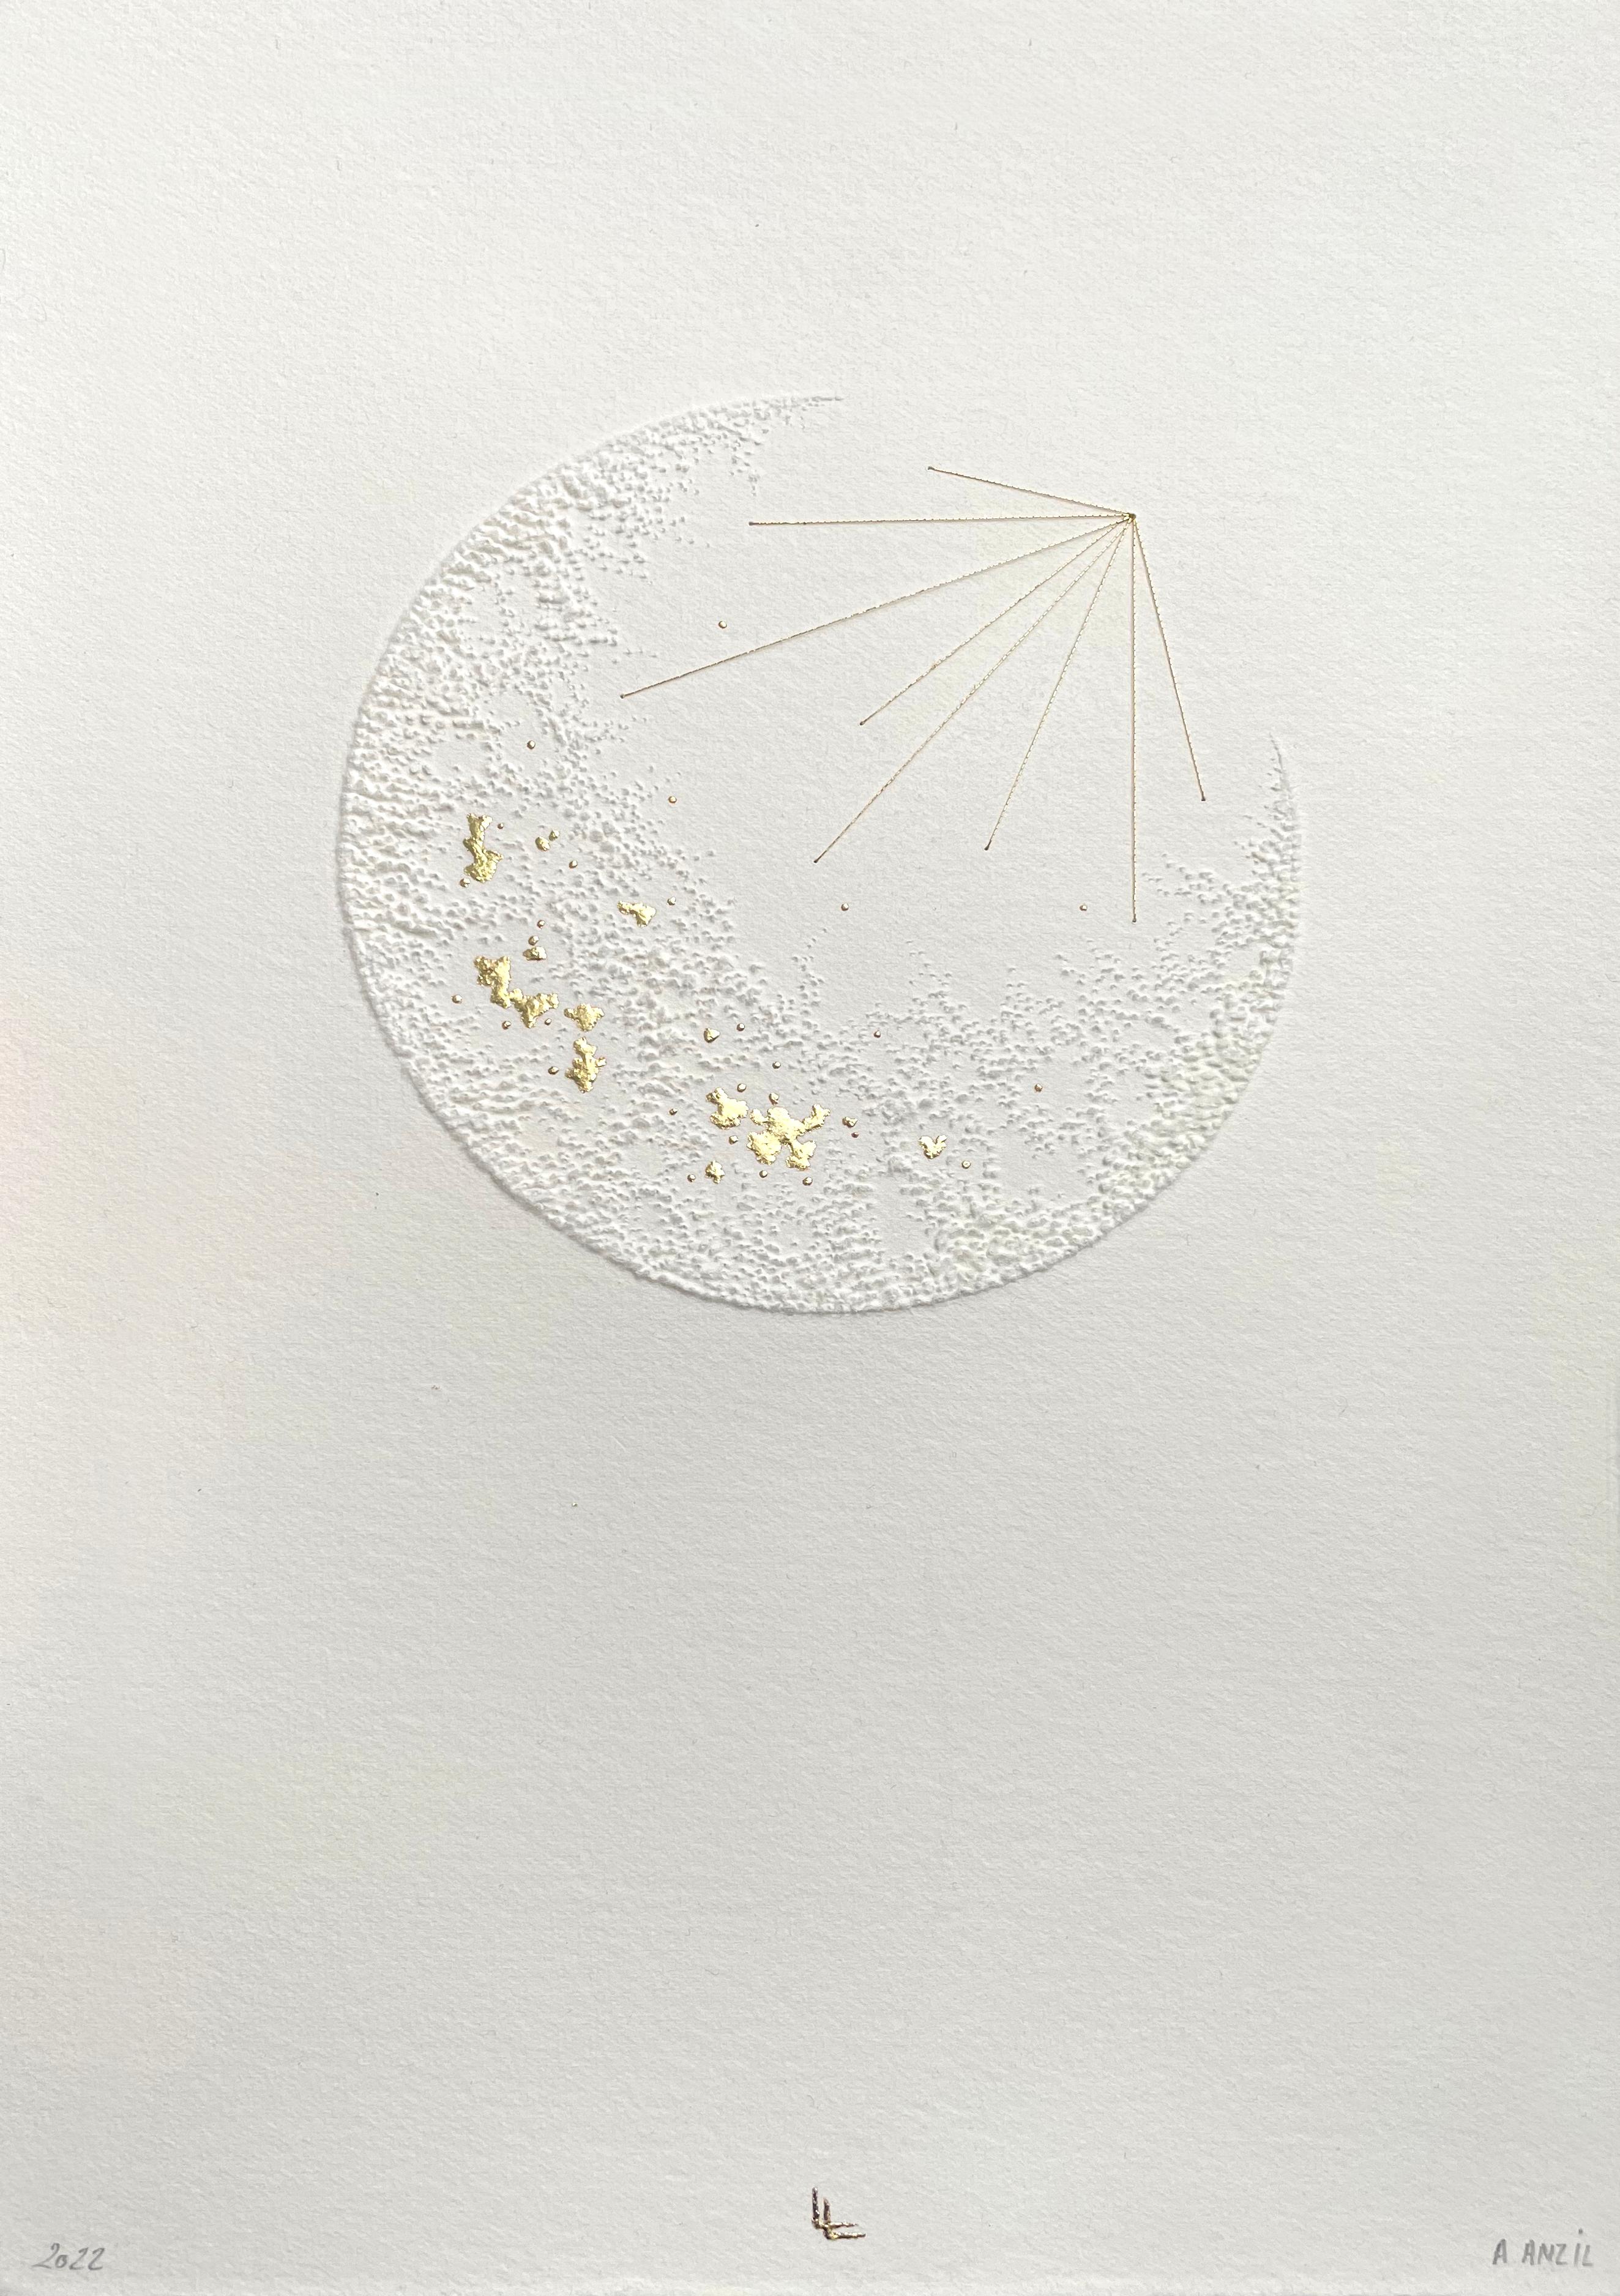 Moon 2- white 3D abstract circle with gold leaves. thread and pulled paper fiber